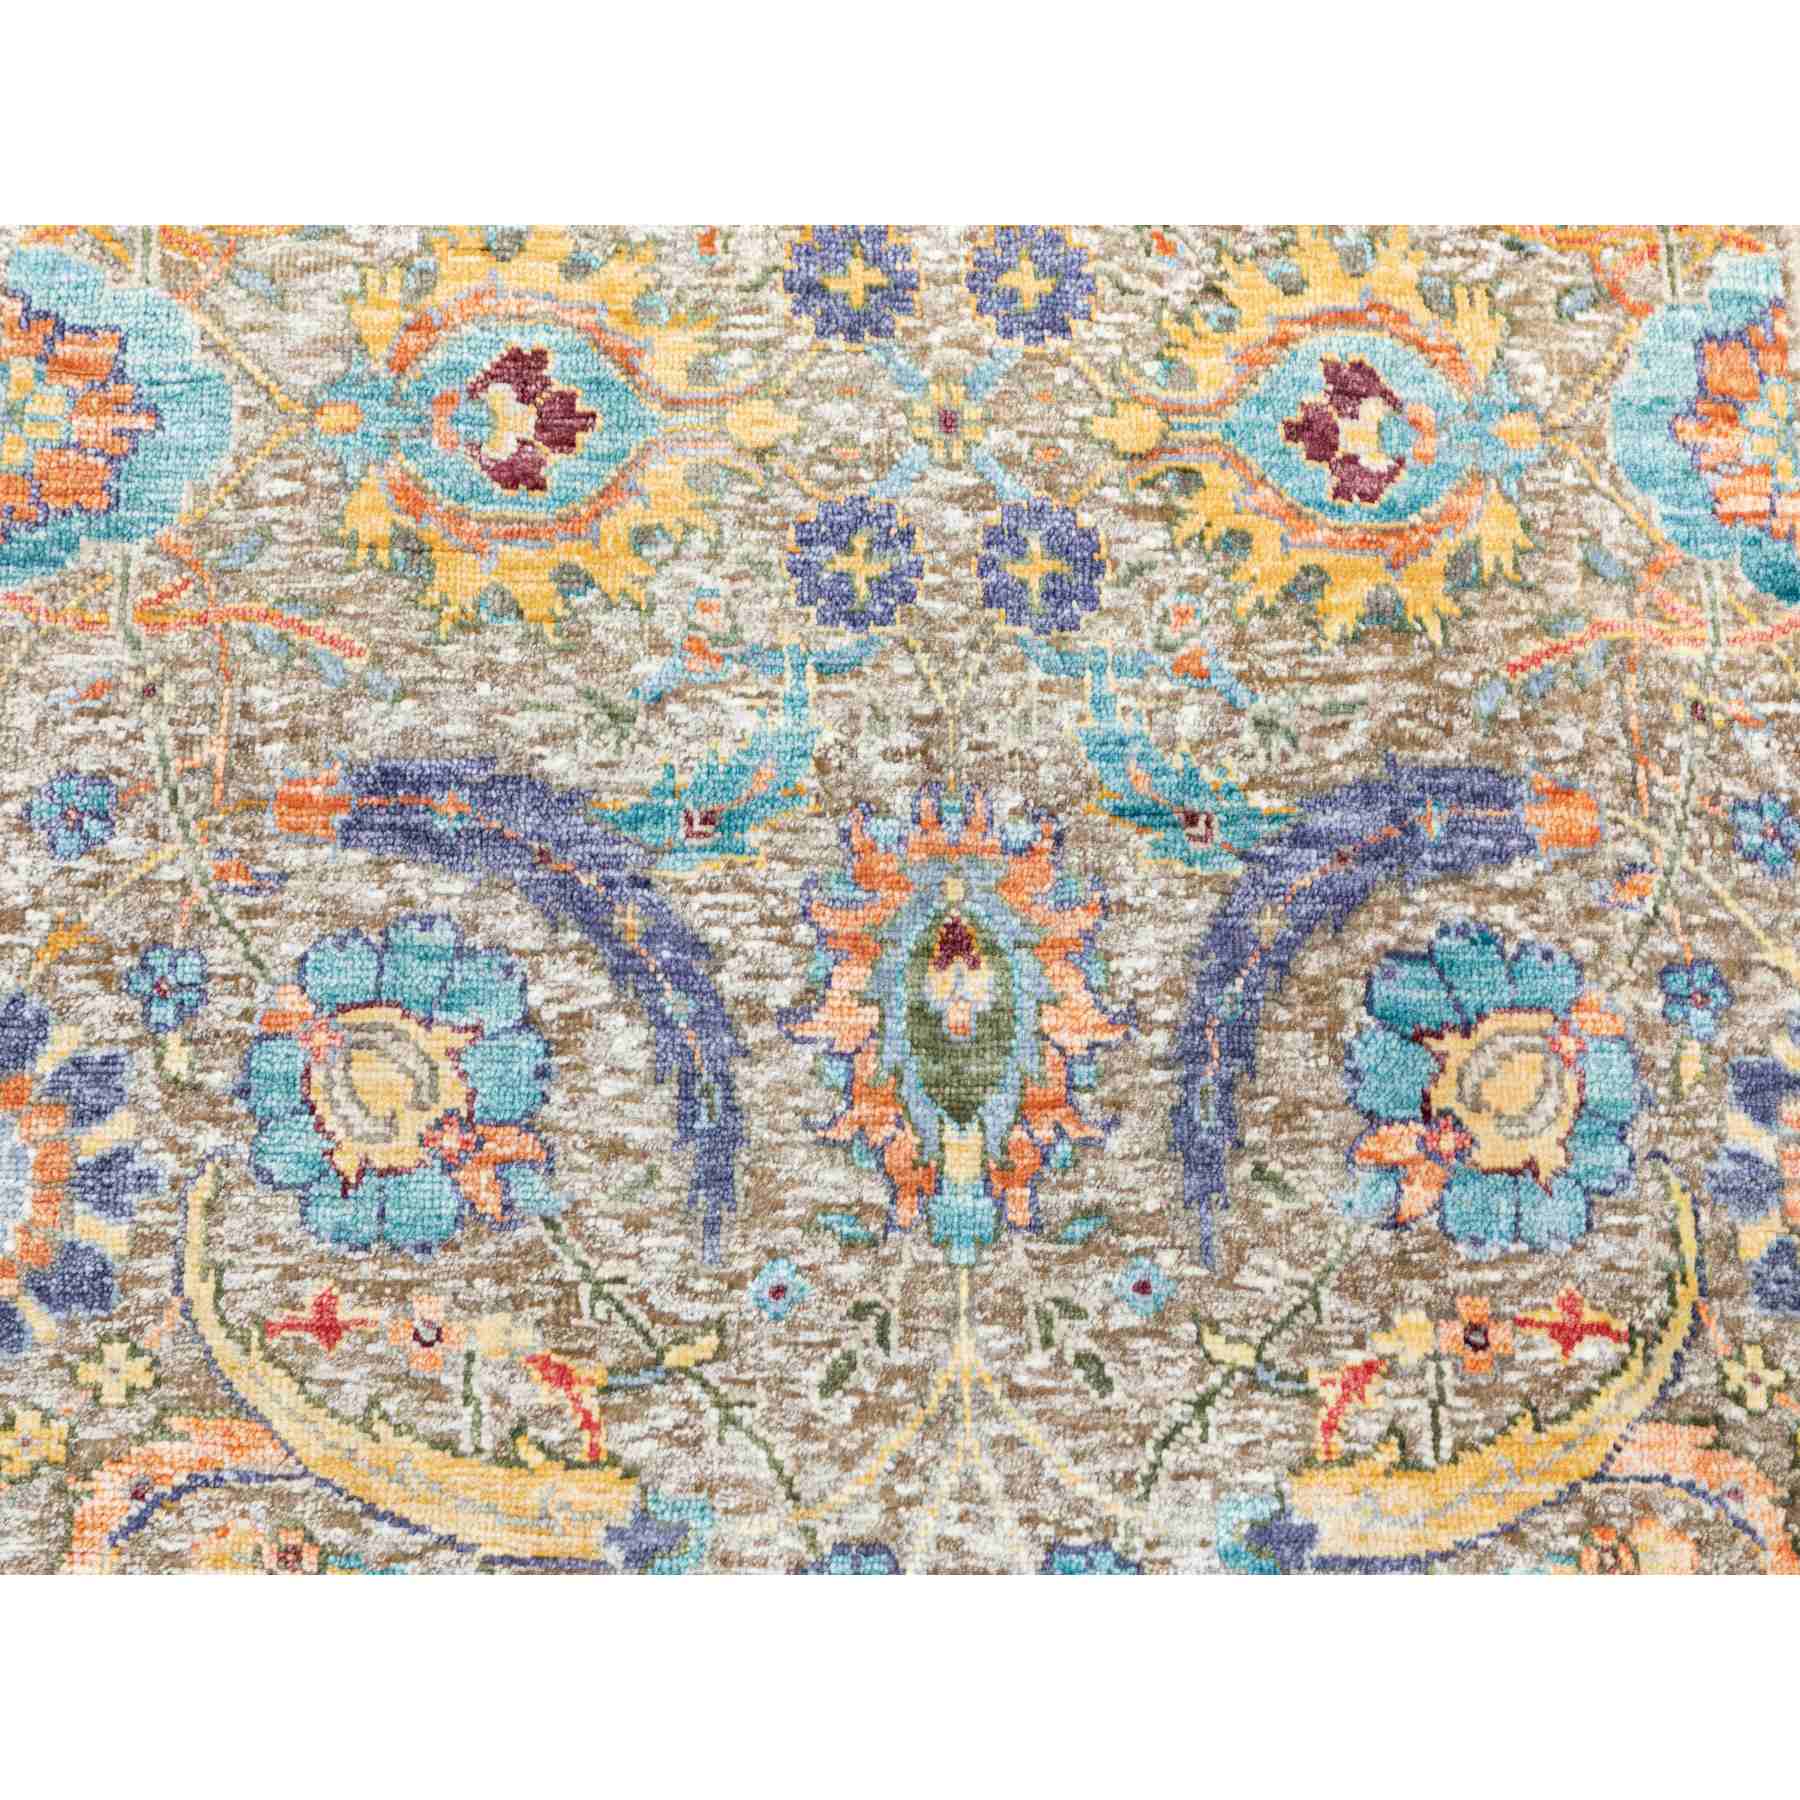 Wool-and-Silk-Hand-Knotted-Rug-294830